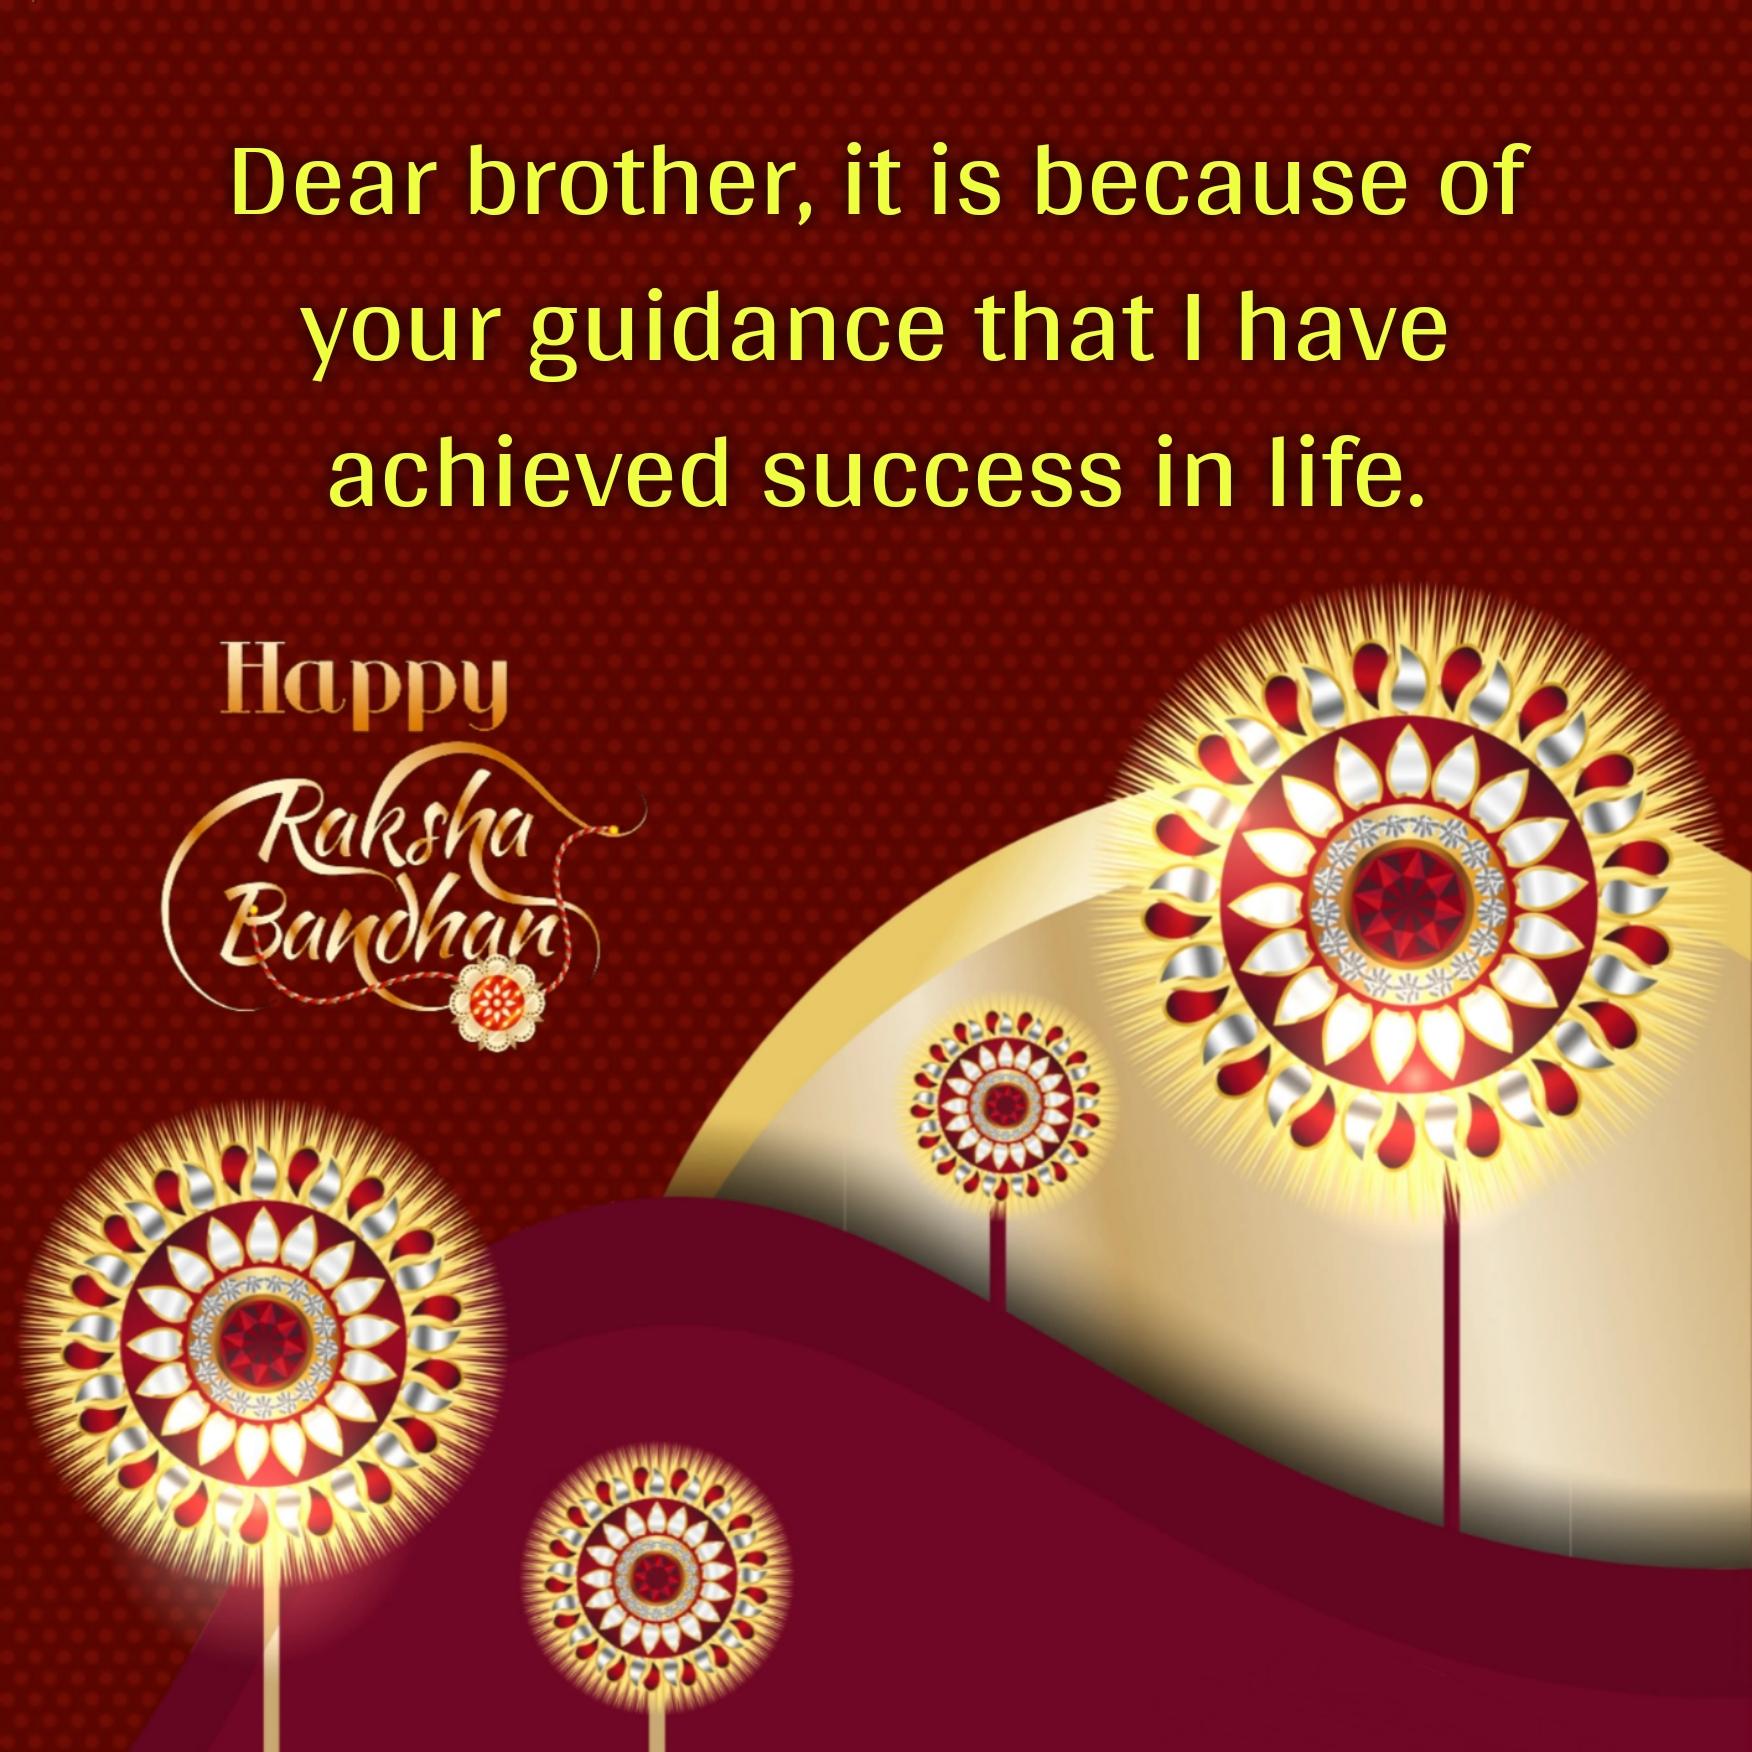 Dear brother it is because of your guidance